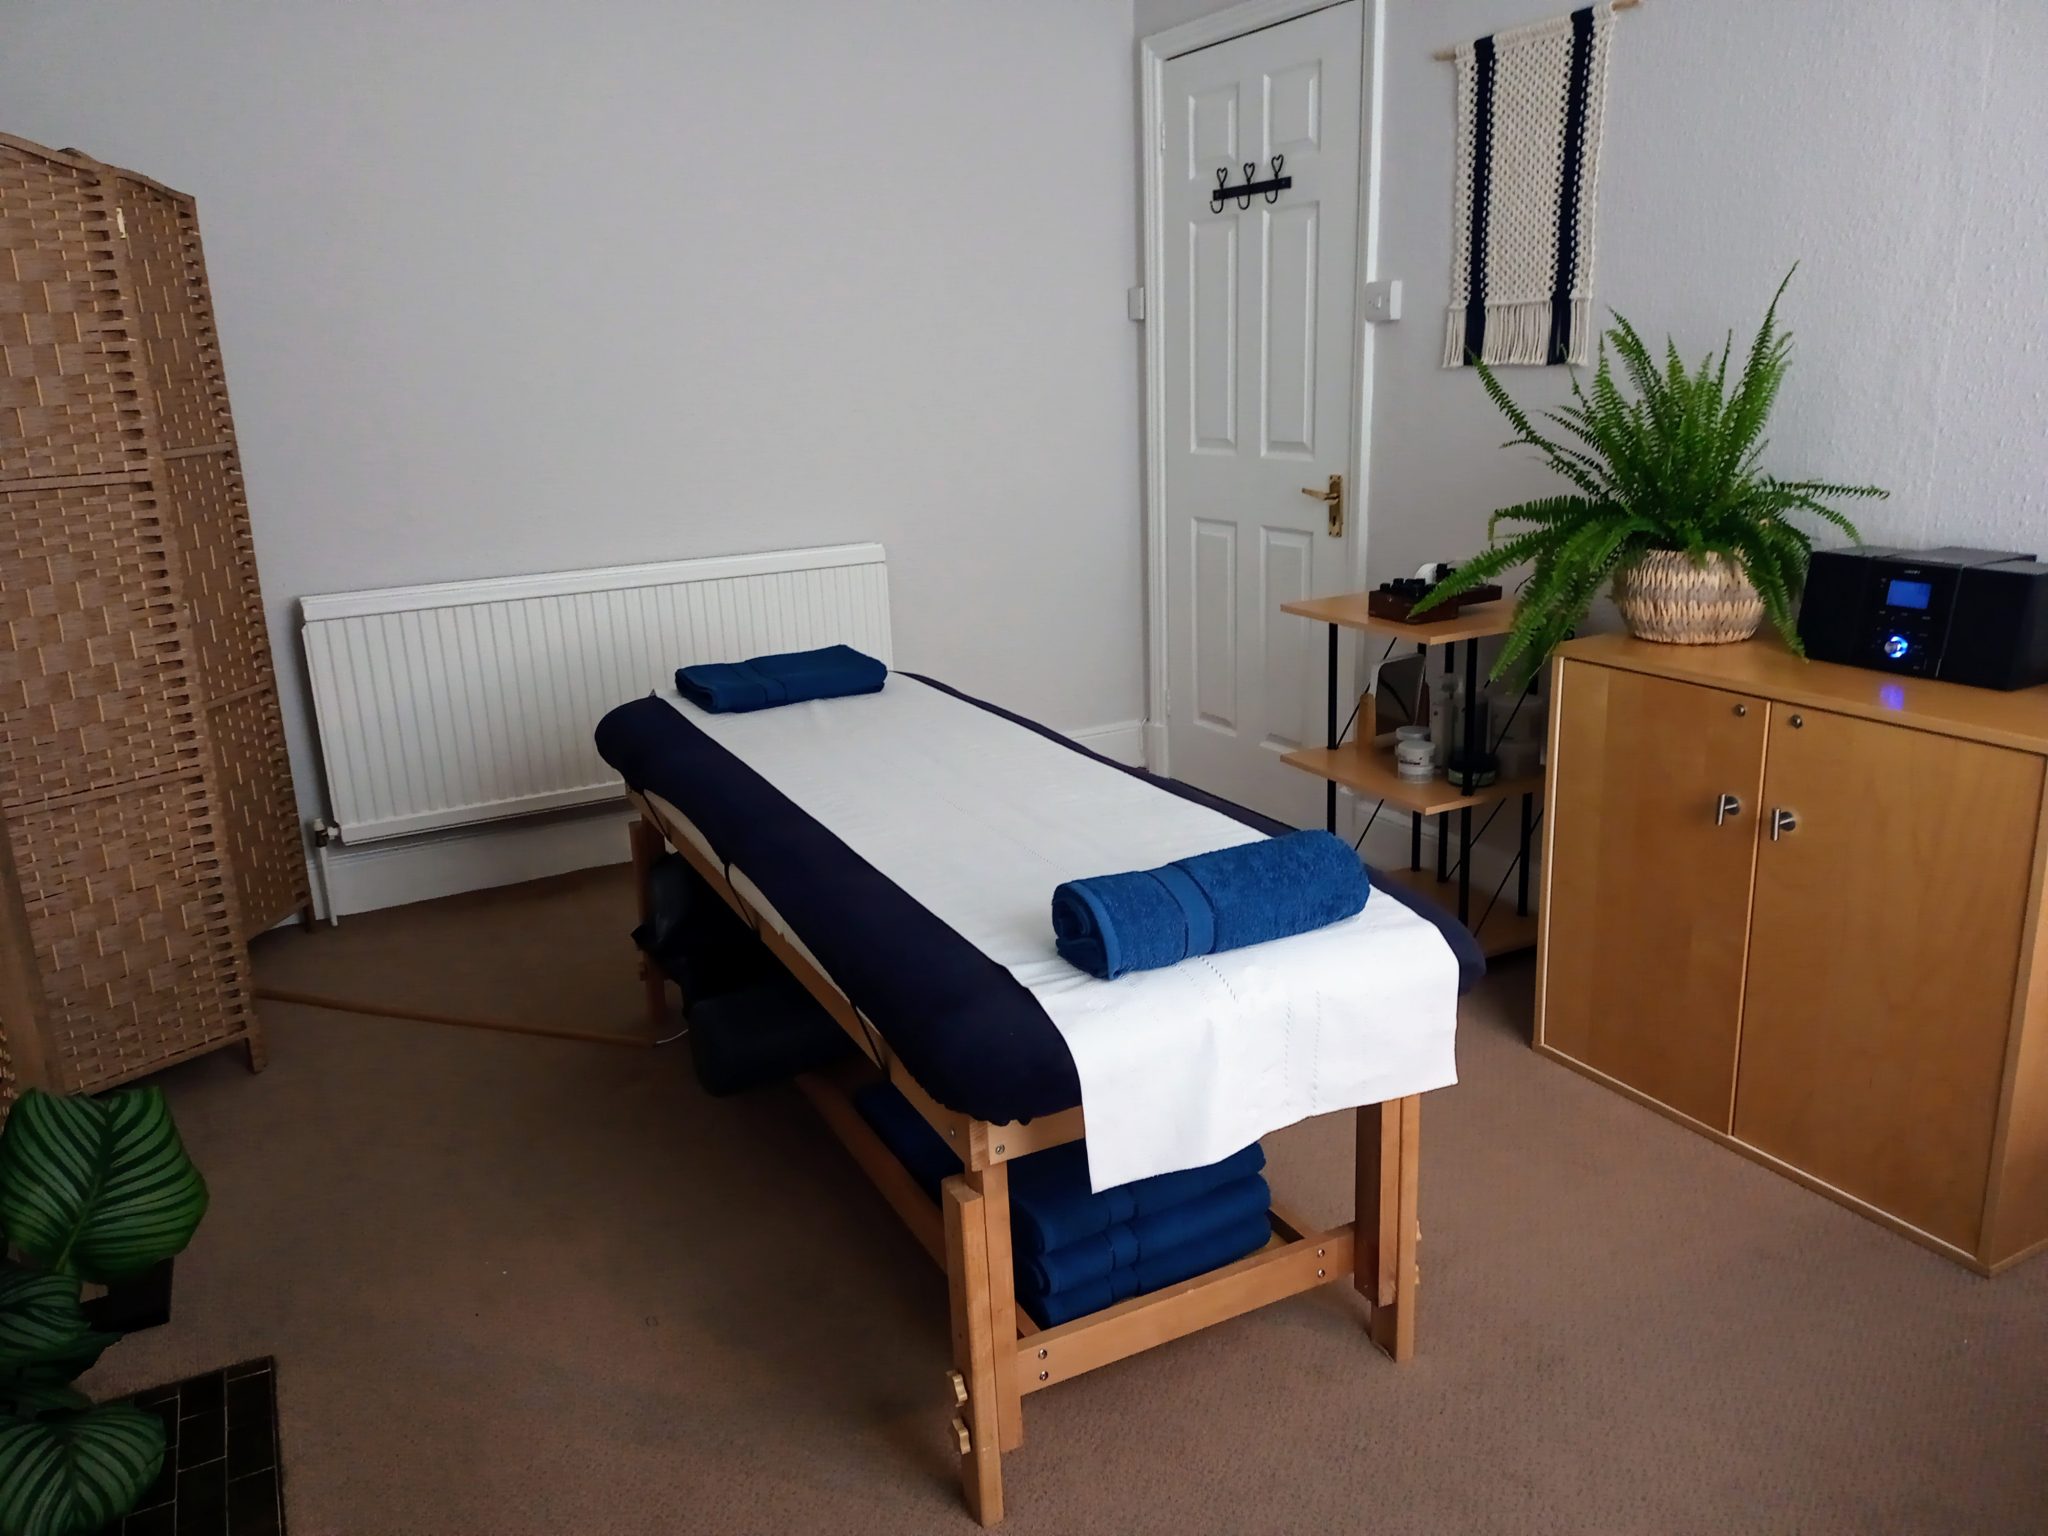 Massage Therapy Leicester Massage For Health Leicester